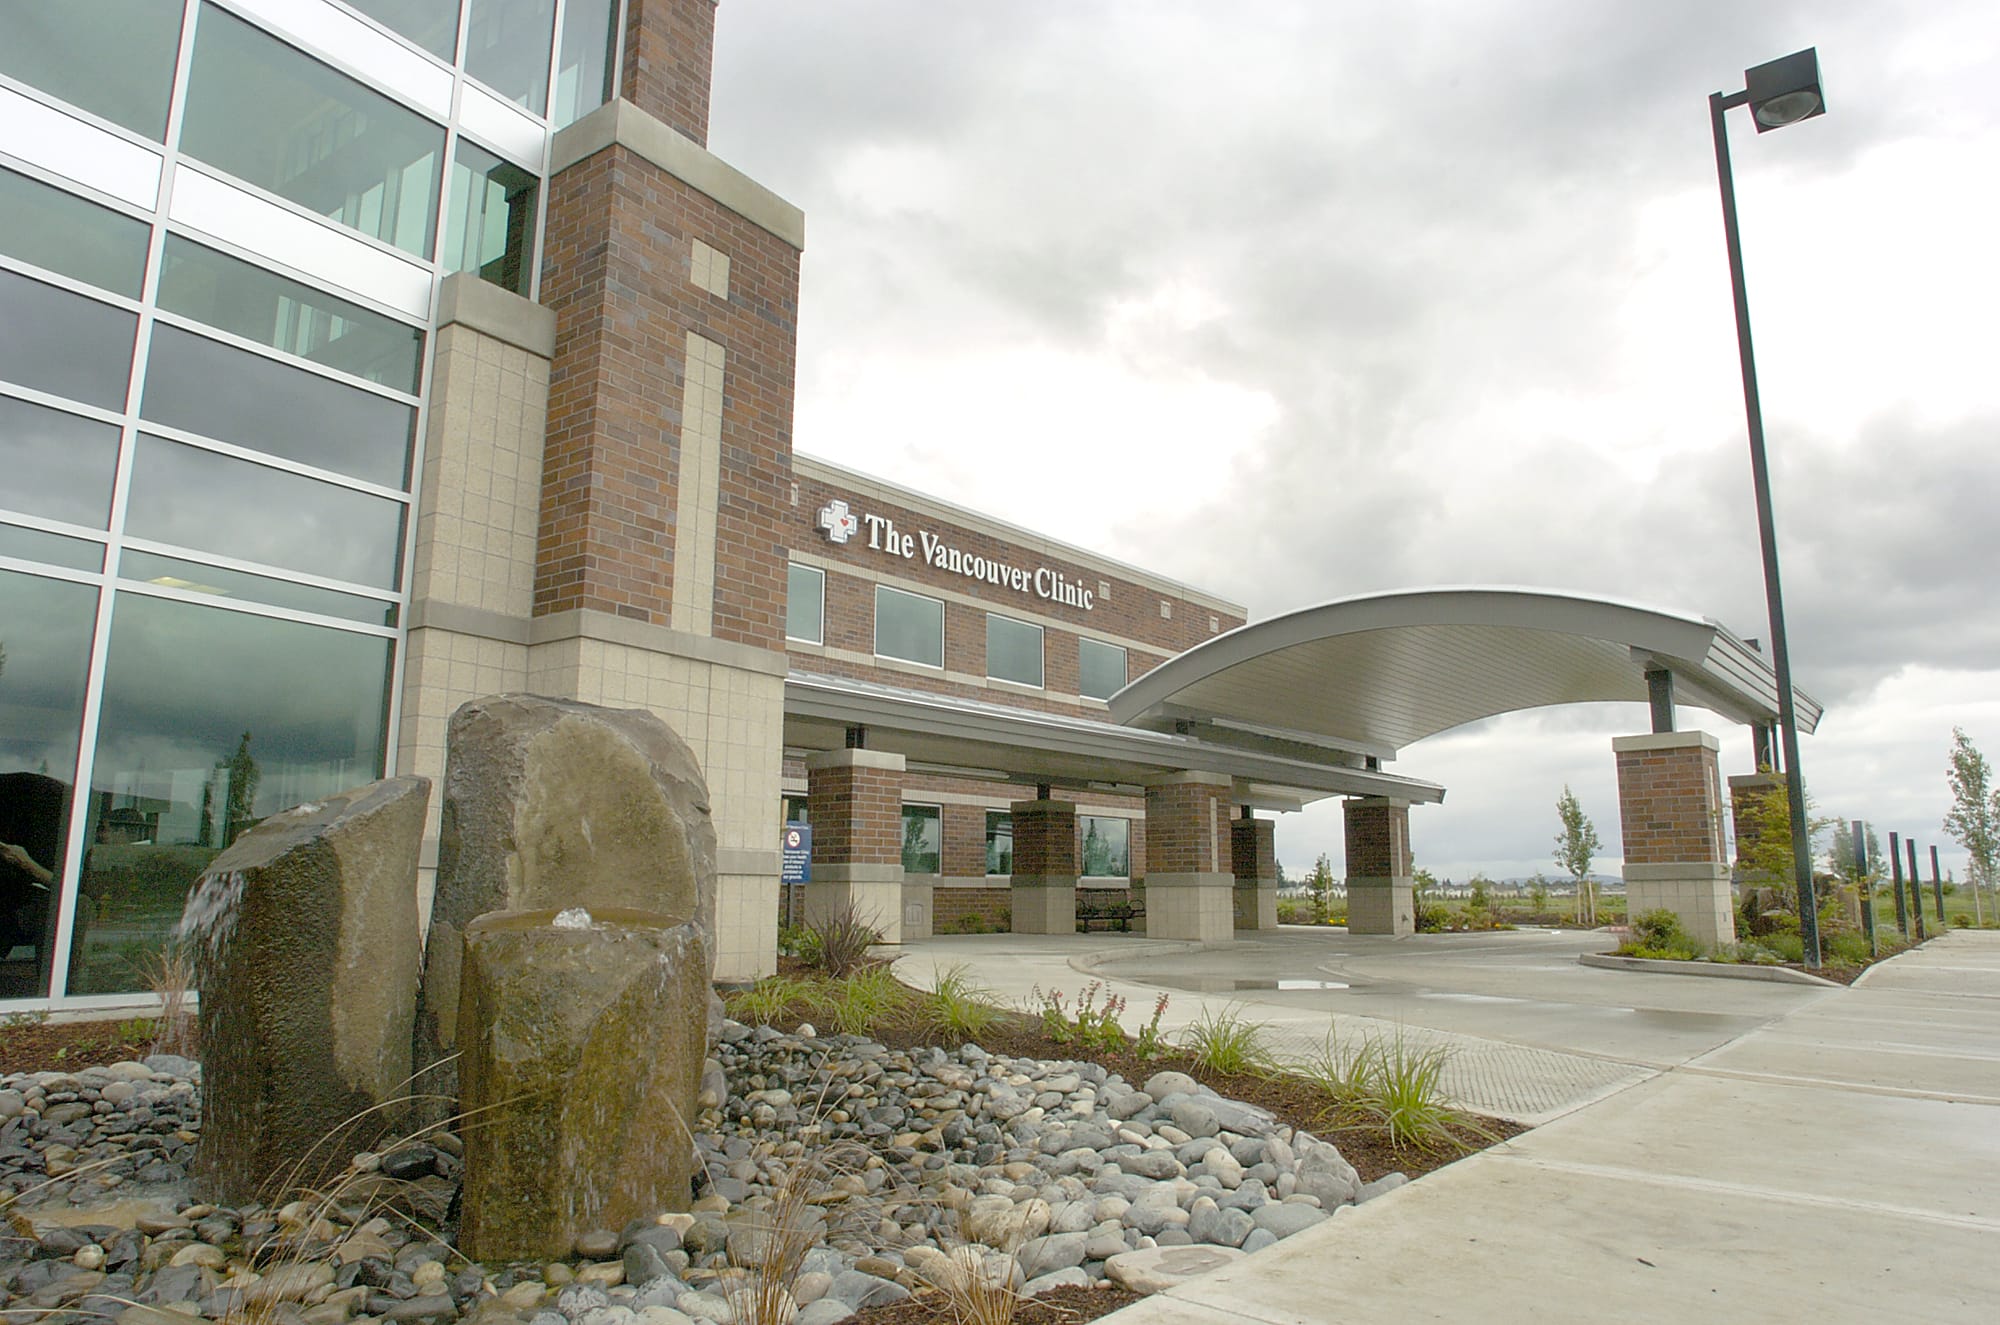 The Vancouver Clinic will no longer accept new Medicaid clients and, over the next three years, will reduce the amount of Medicaid services it provides to Clark County residents.